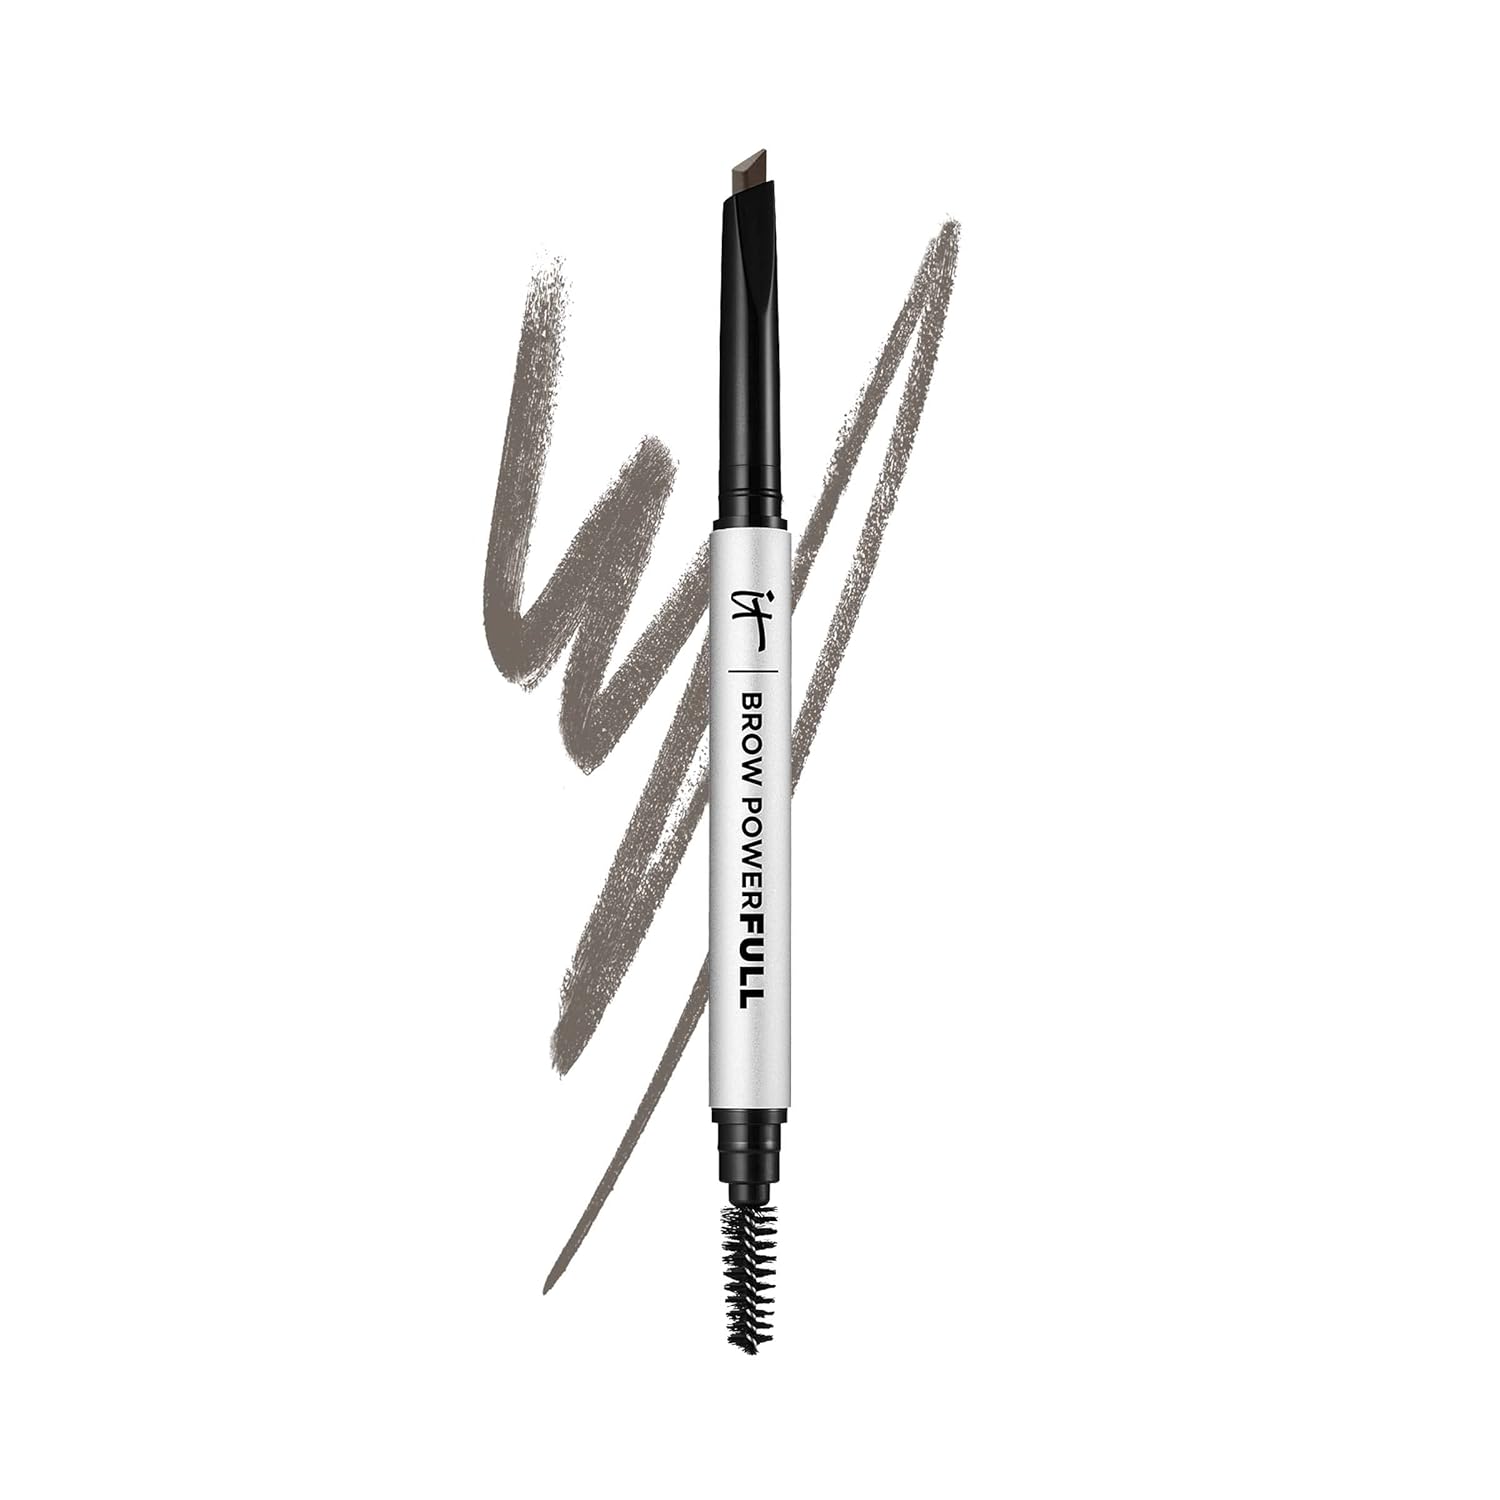 IT Cosmetics Brow PowerFULL, Universal Taupe - Universal Eyebrow Pencil with Triangular Tip - Delivers Bold Volume & Shaping - Budge-Proof Formula - Built-In Spoolie - 0.012